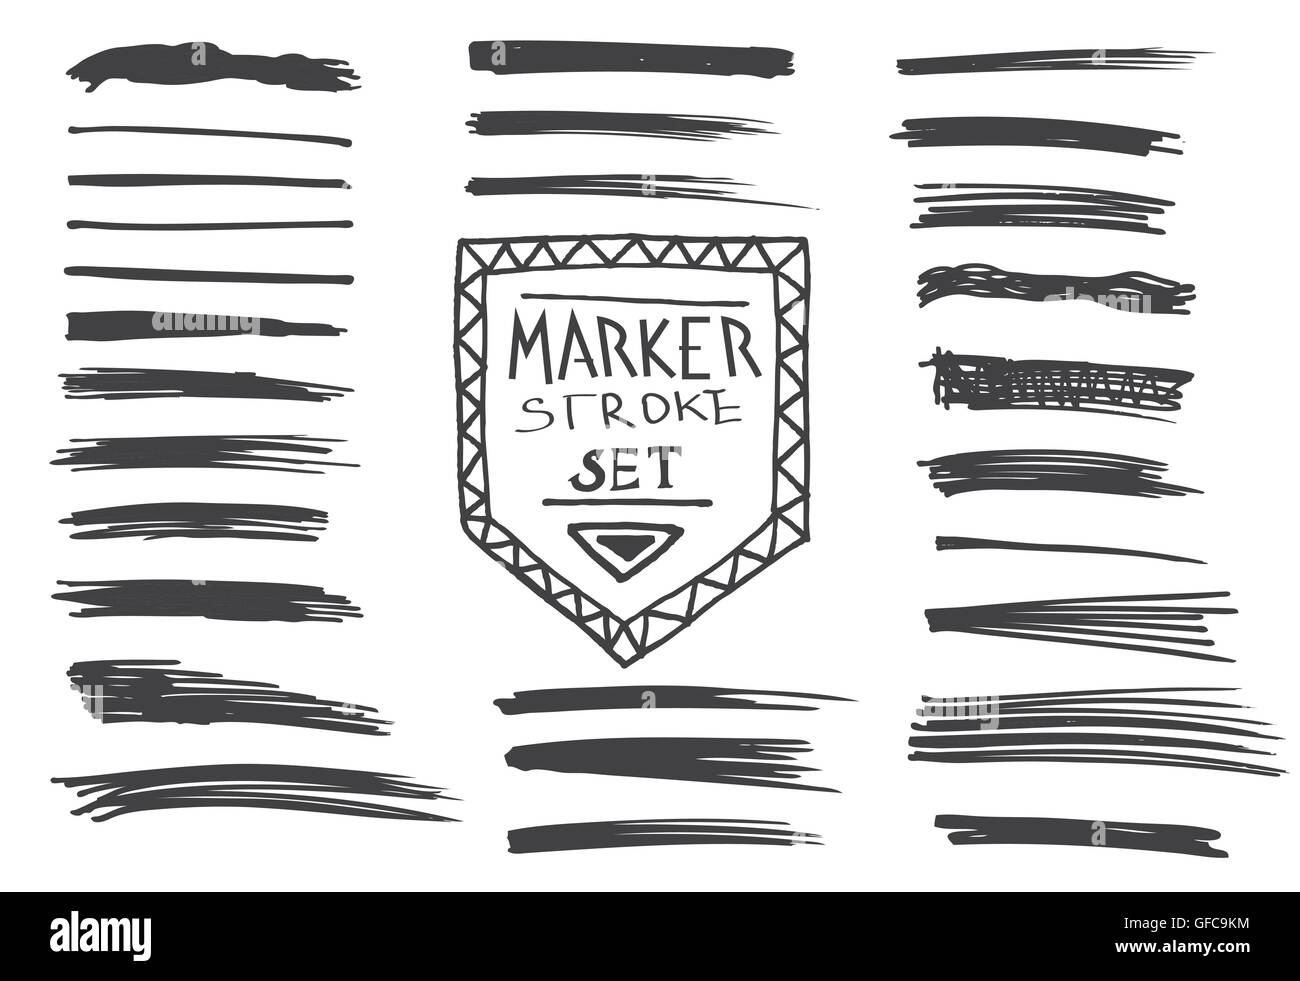 Permanent marker Black and White Stock Photos & Images - Alamy